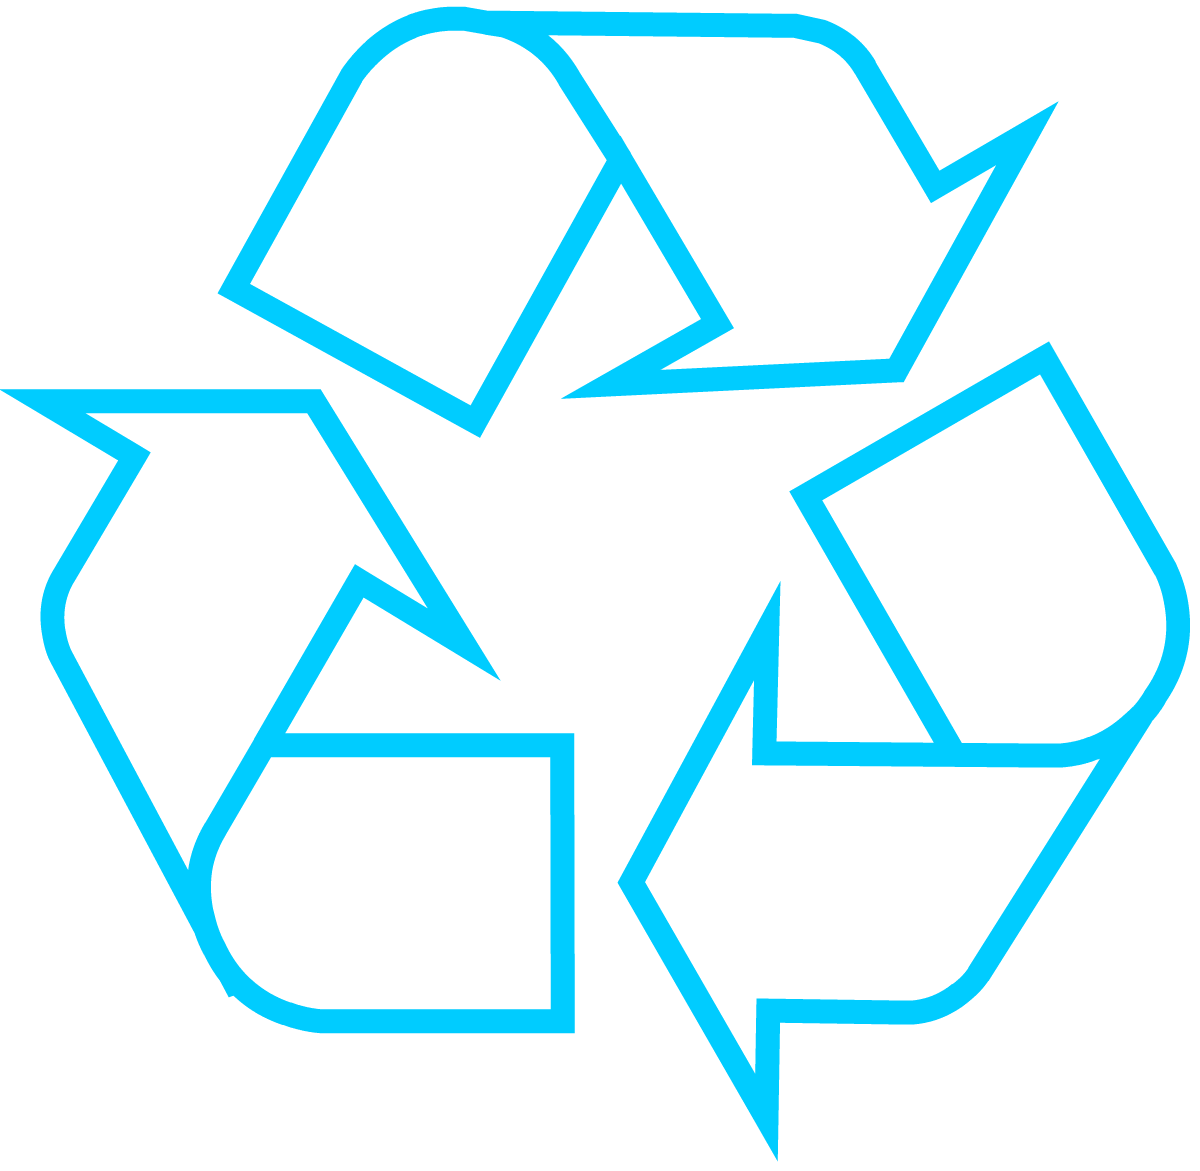 Blue and Light Blue Logo - Recycling Symbol - Download the Original Recycle Logo